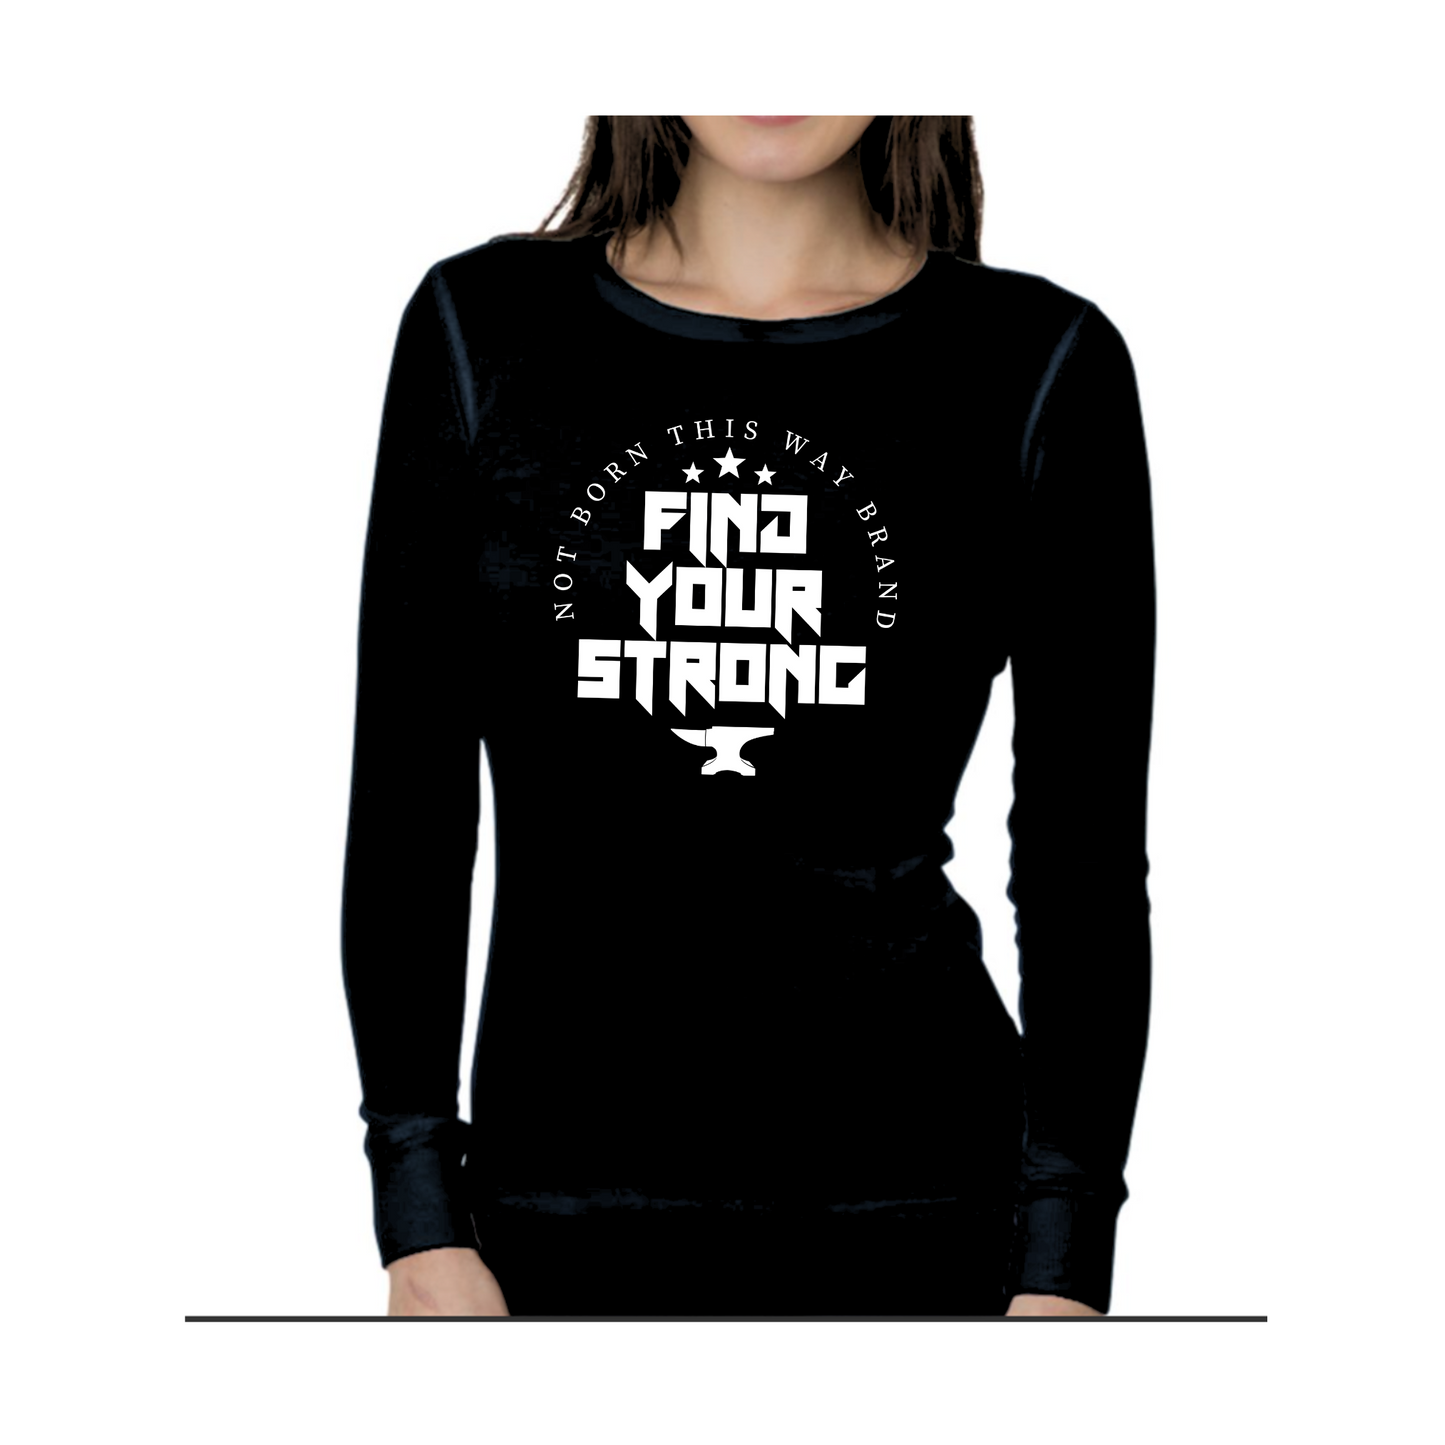 FIND YOUR STRONG- Women's longsleeve thermal tee